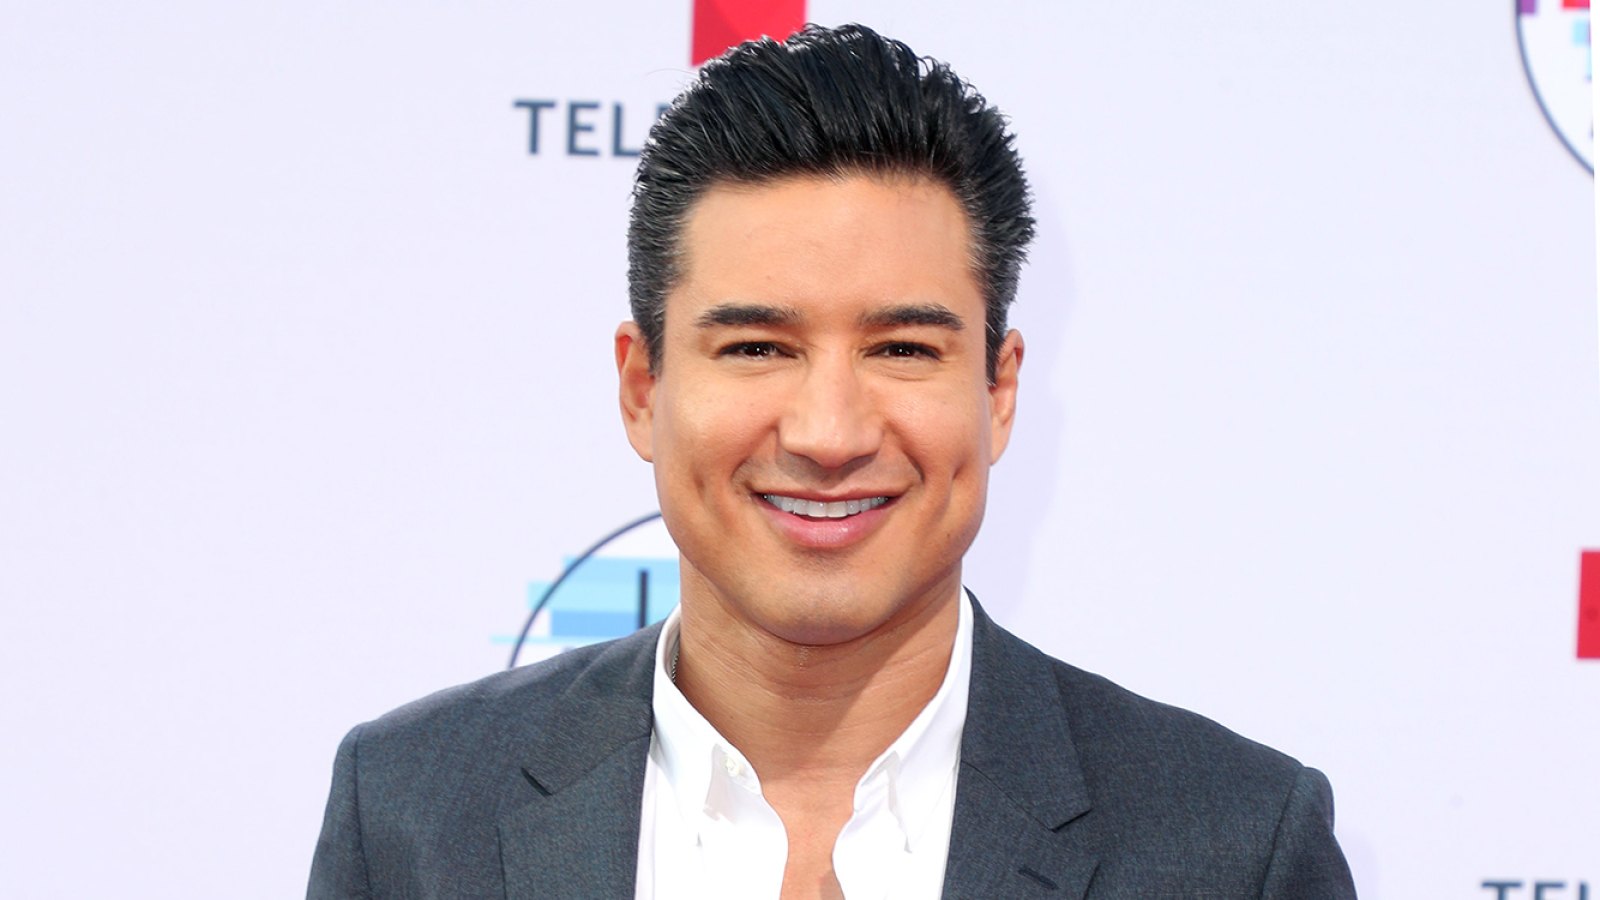 Mario Lopez Teases ‘Saved by the Bell’ Original Castmates’ Return for Reboot